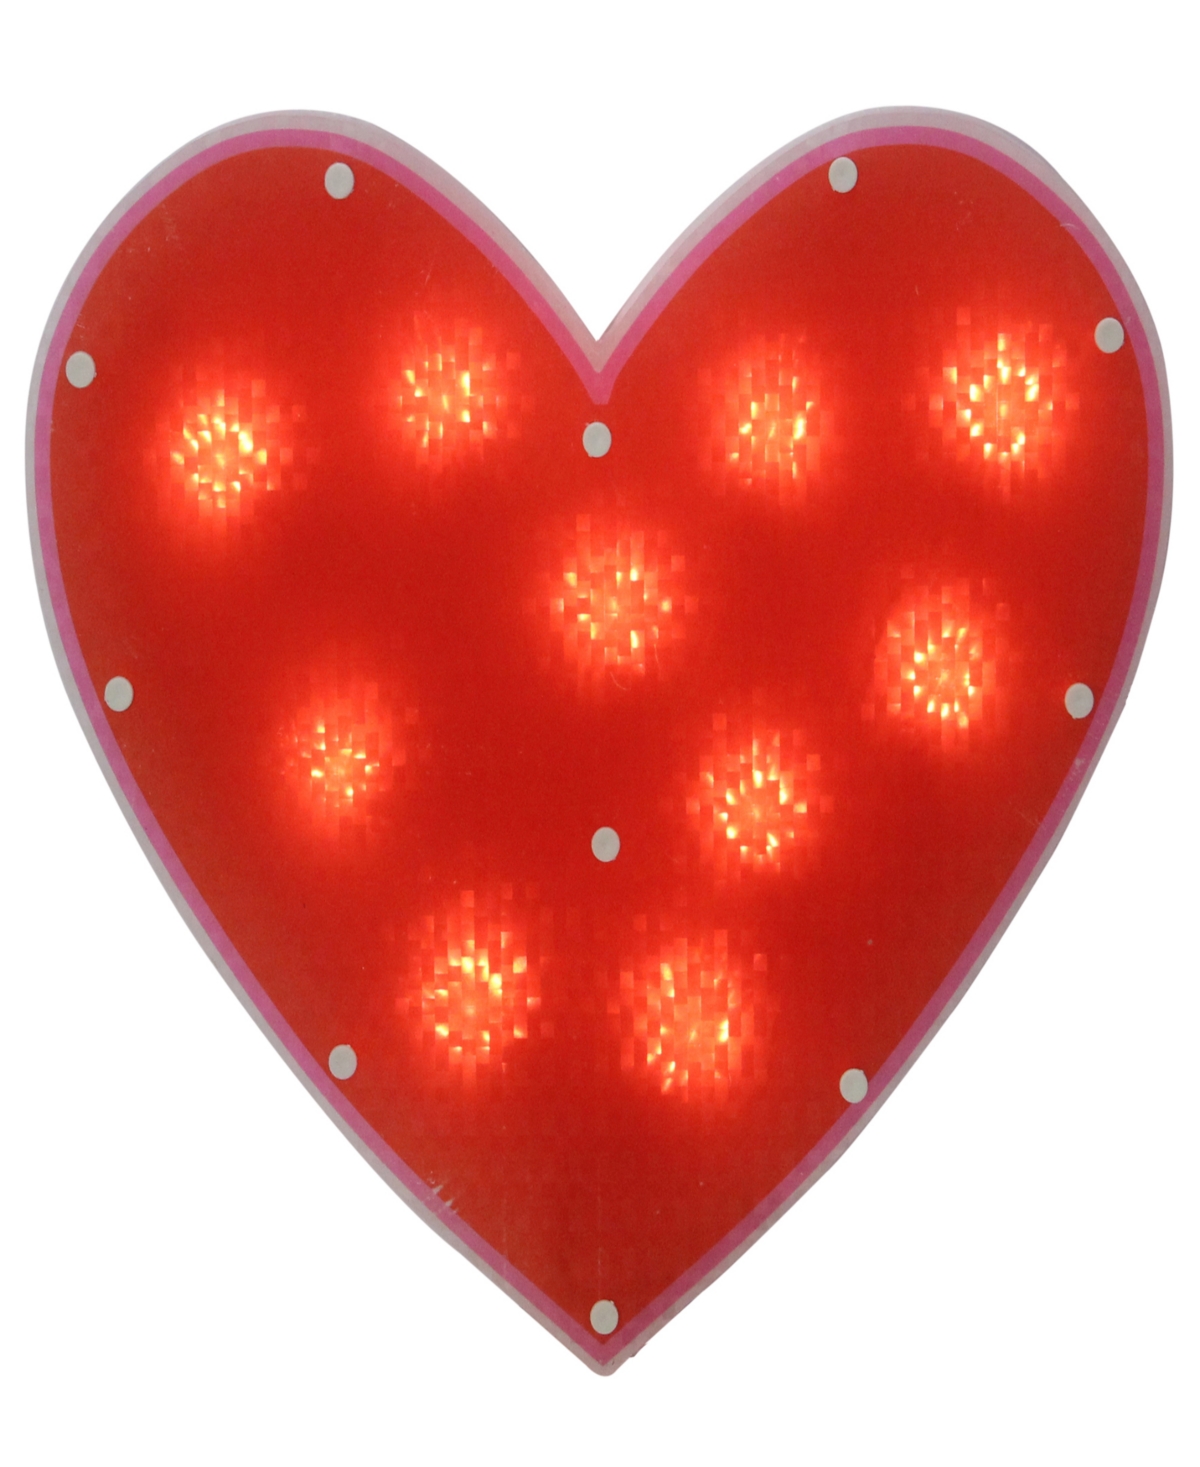 Northlight 13" Lighted Shimmering Heart Valentine's Day Window Silhouette Decoration In Red